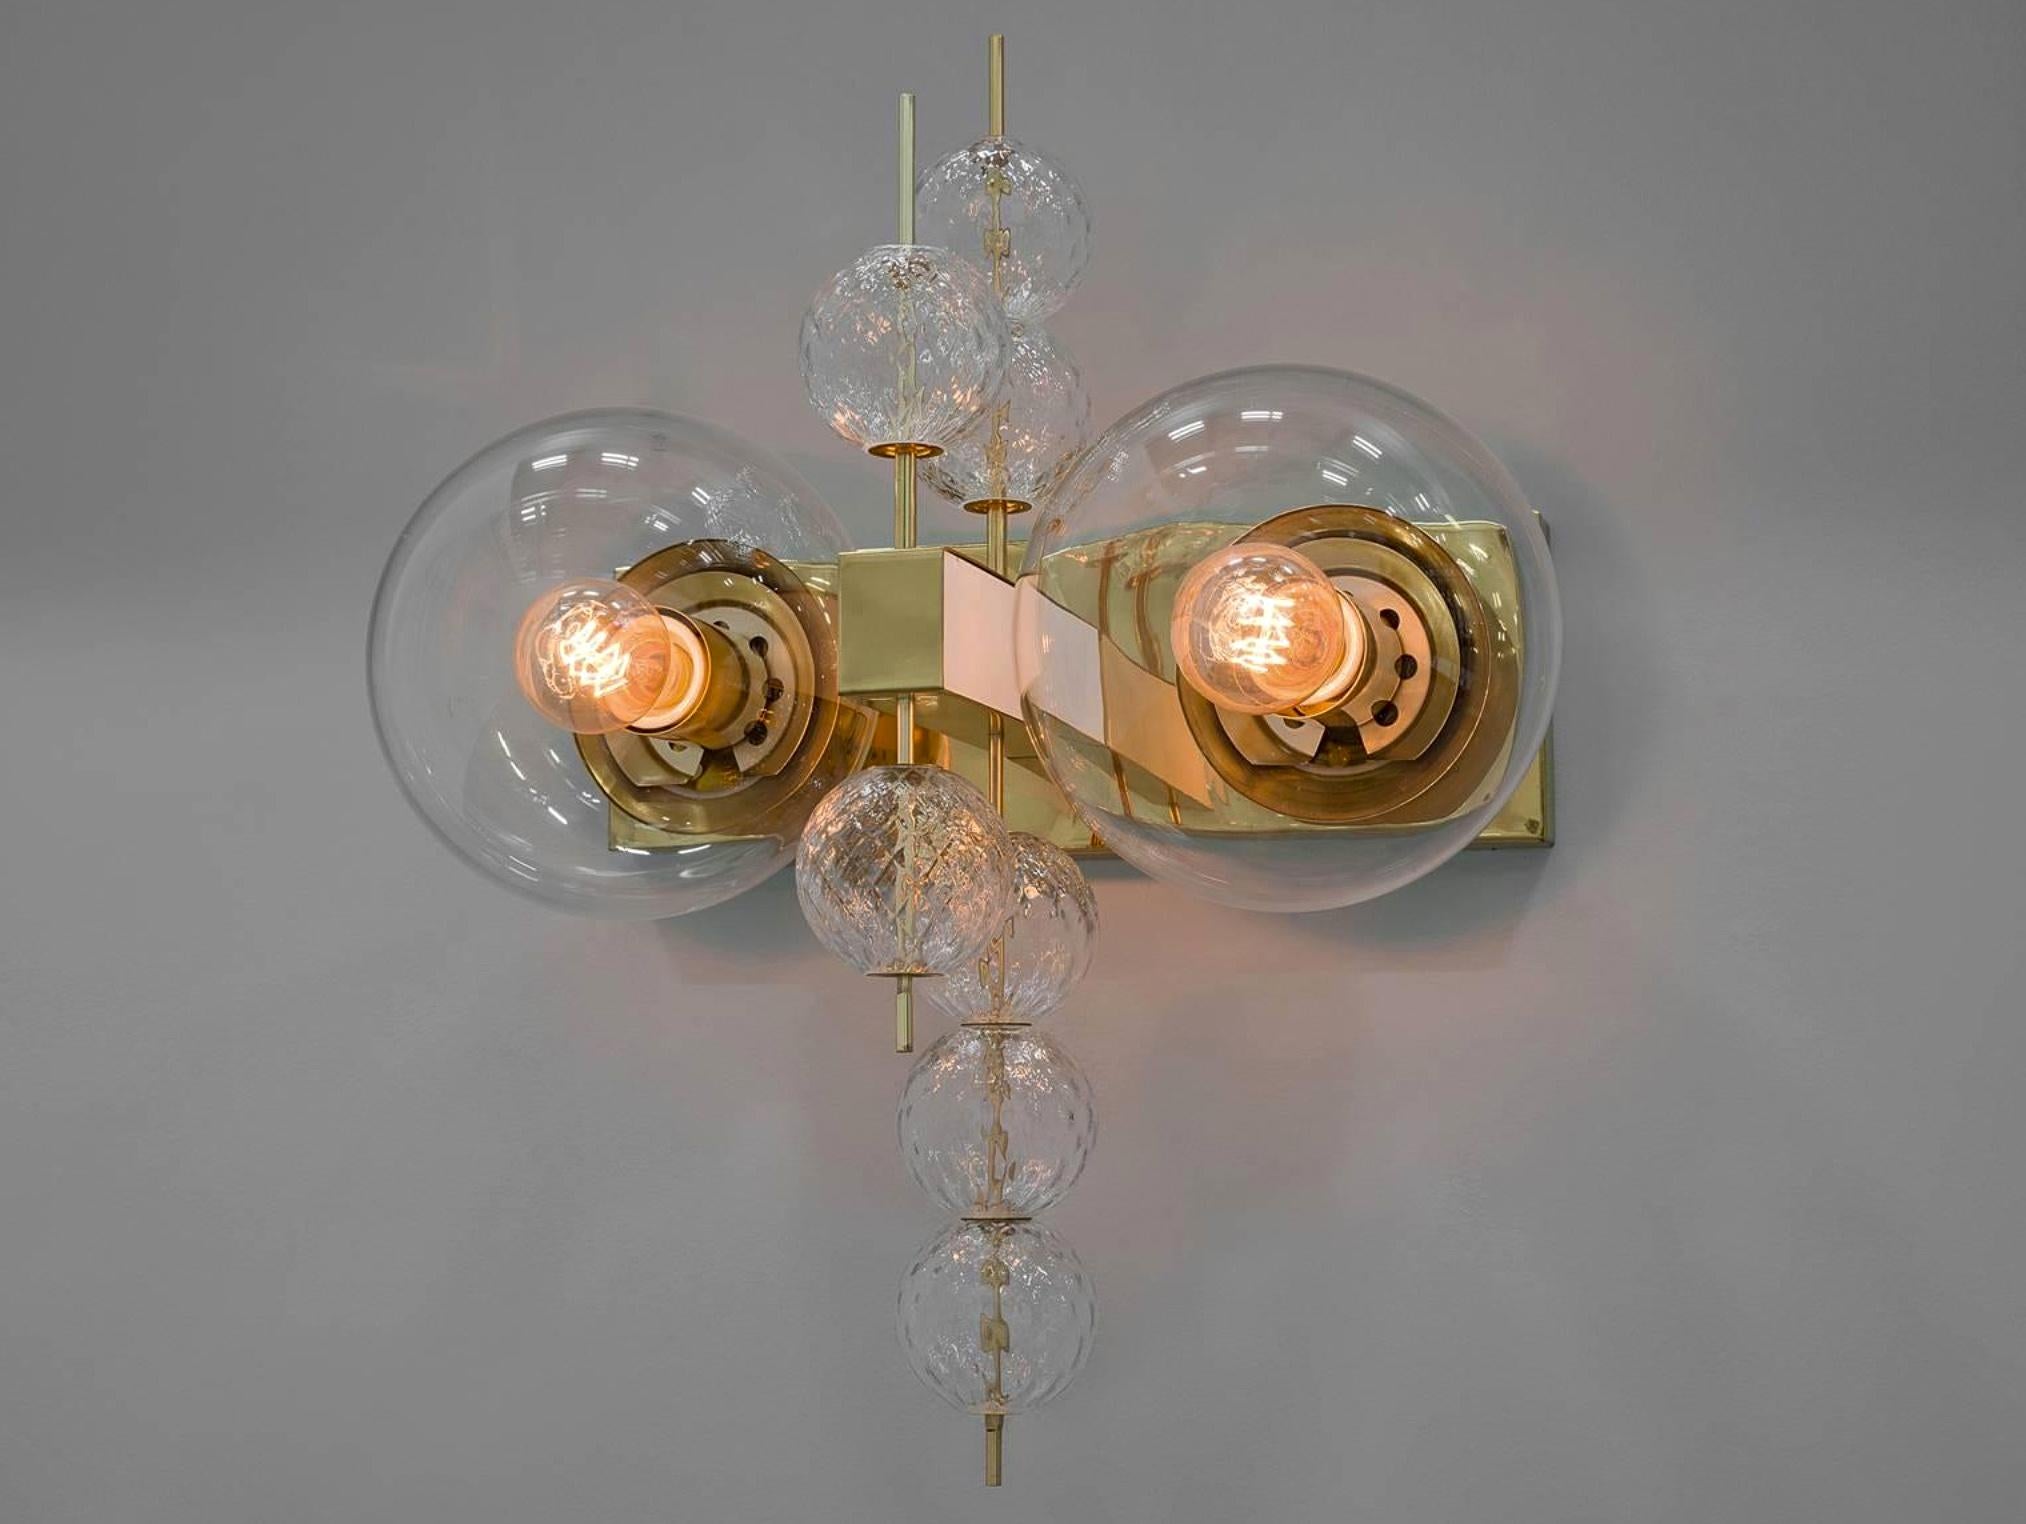 Large set of 15 hotel wall chandeliers with brass fixture and large hand blown glass. The scones are beautifully decorated thanks to the structured glass. The pleasant light it spreads is very atmospheric, these wall chandeliers will contribute to a